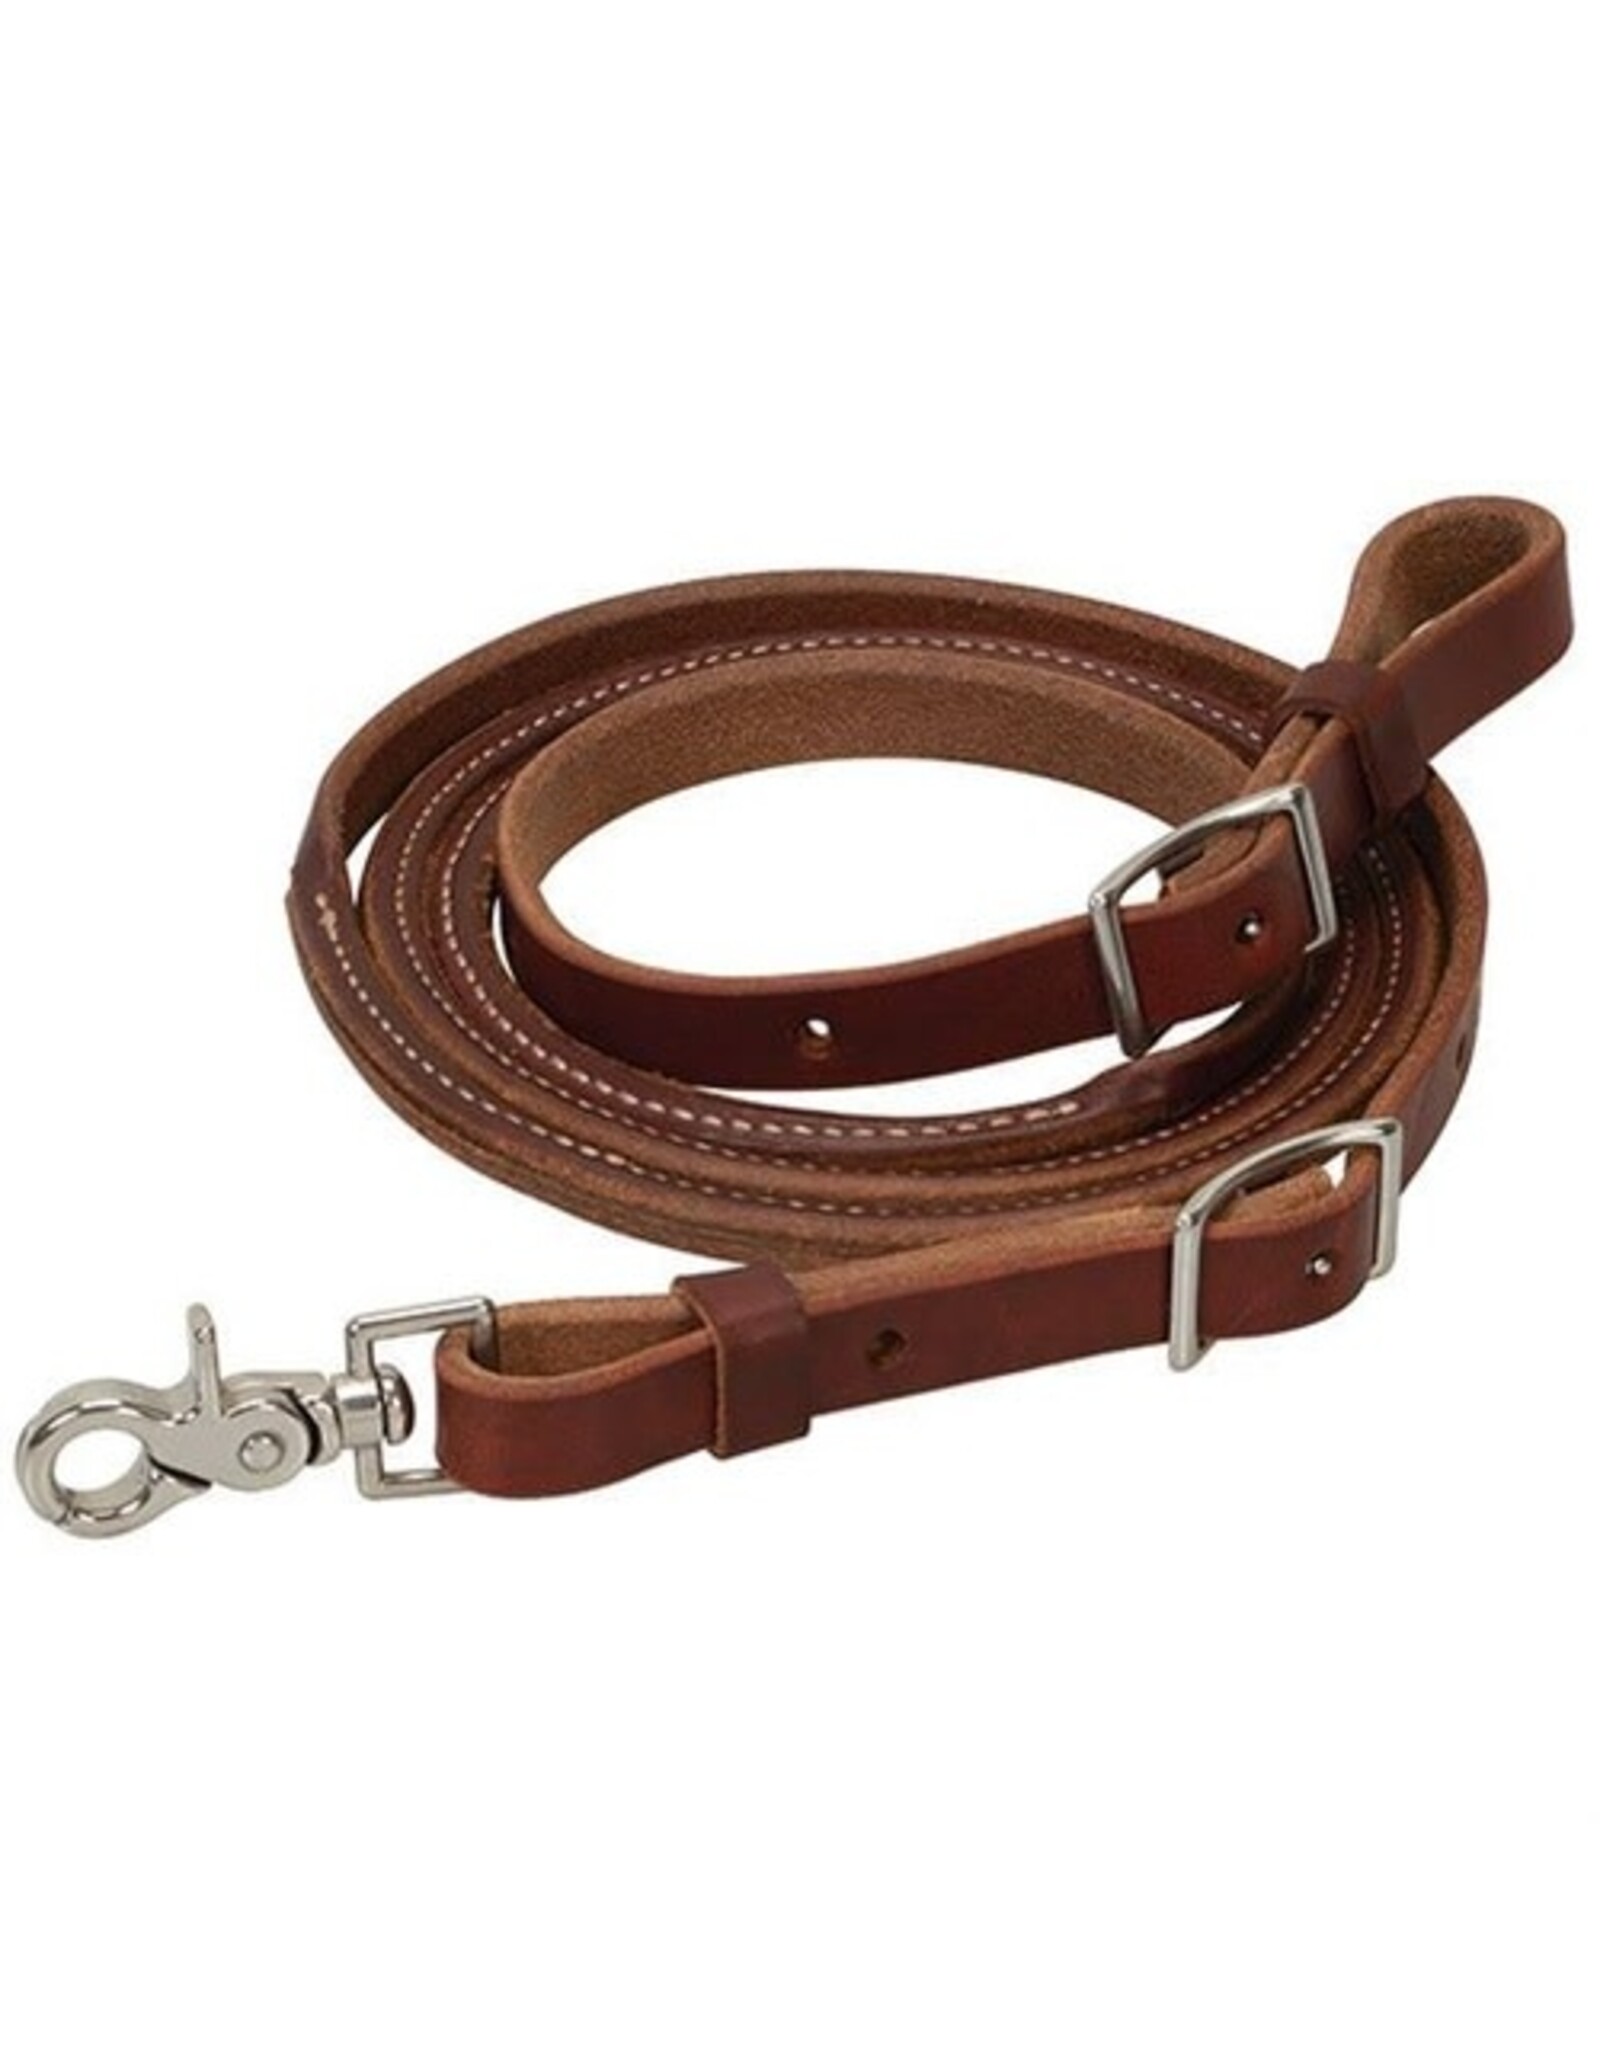 Oiled Canyon Rose Heavy Harness Round Roper Rein 3/4" X 7'